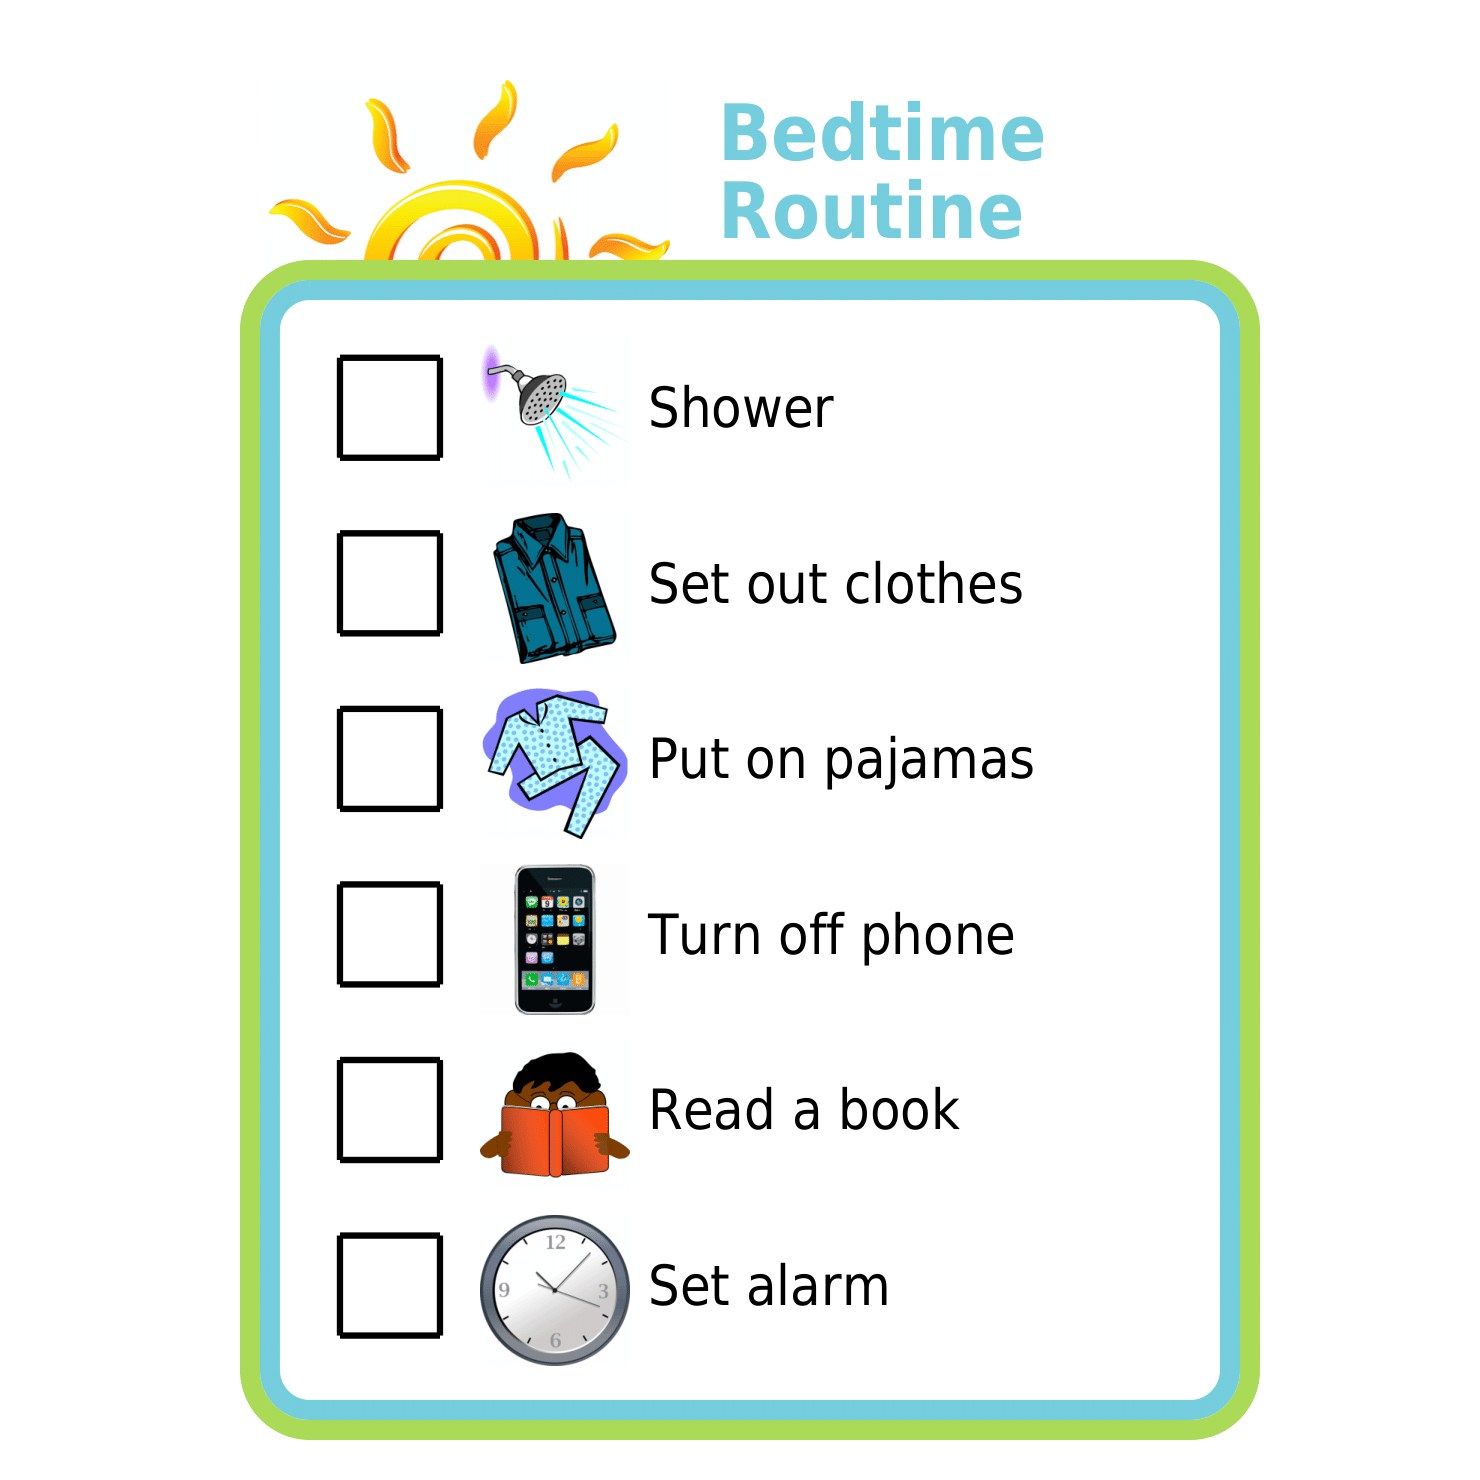 Bedtime Routine with Pictures: Edit | Print | Go Mobile